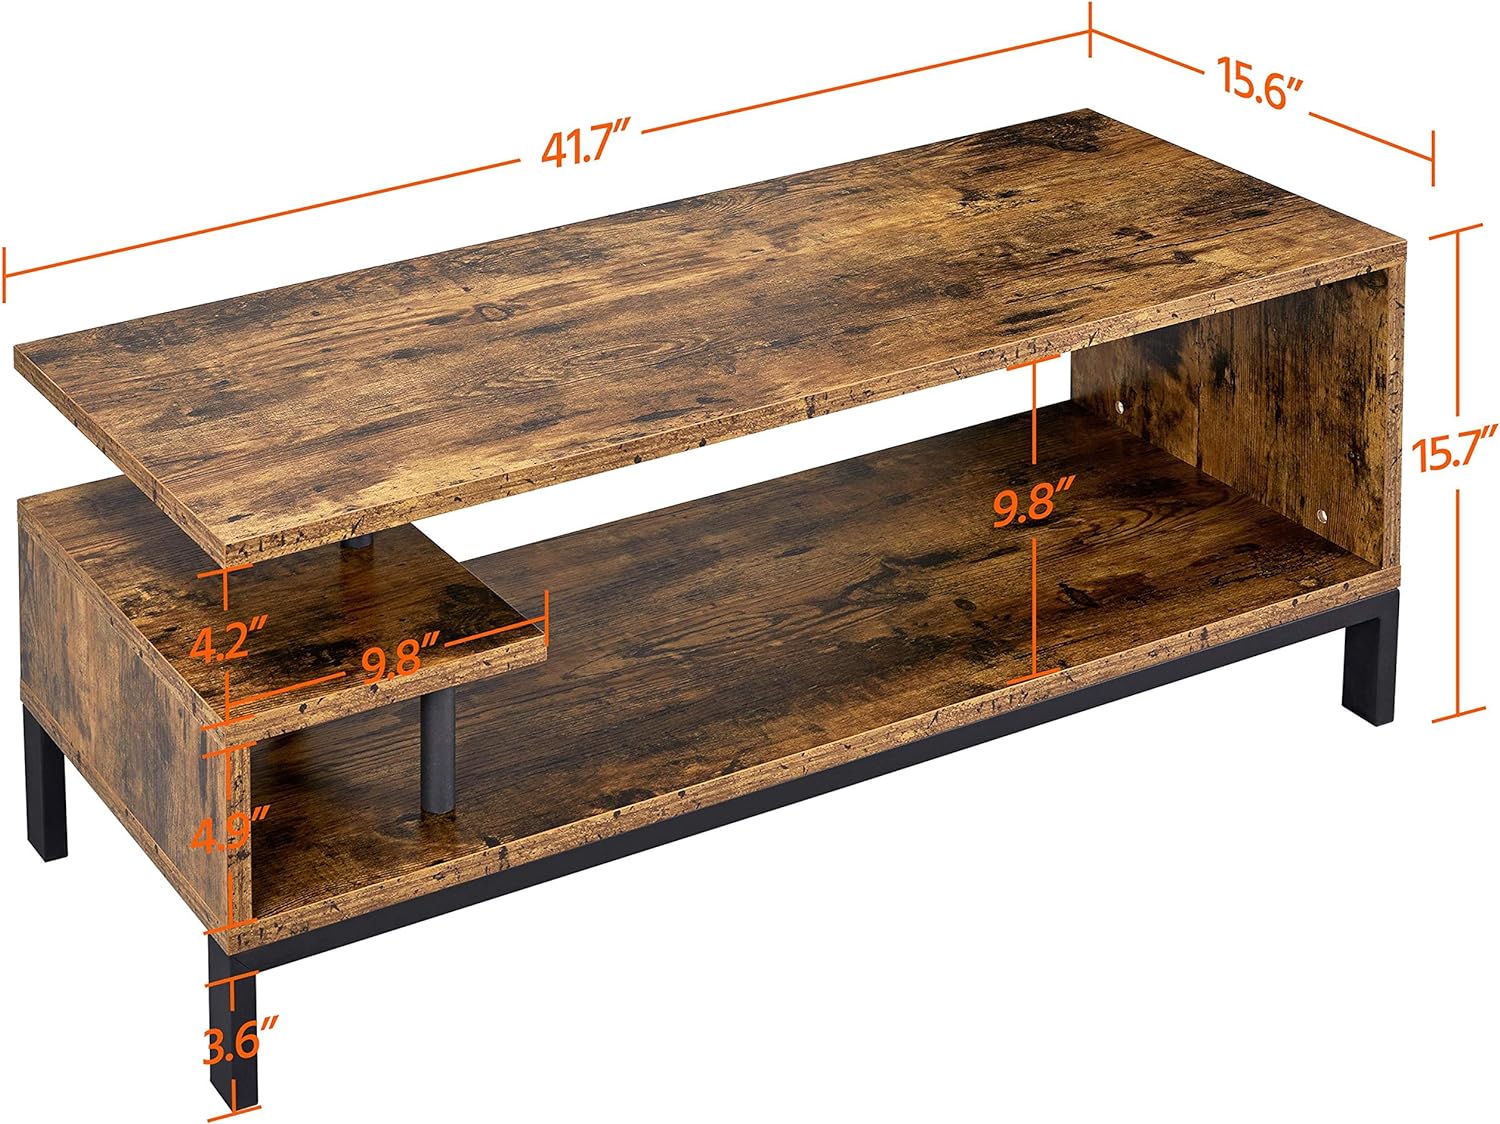 Yaheetech Rustic TV Stand dimensions